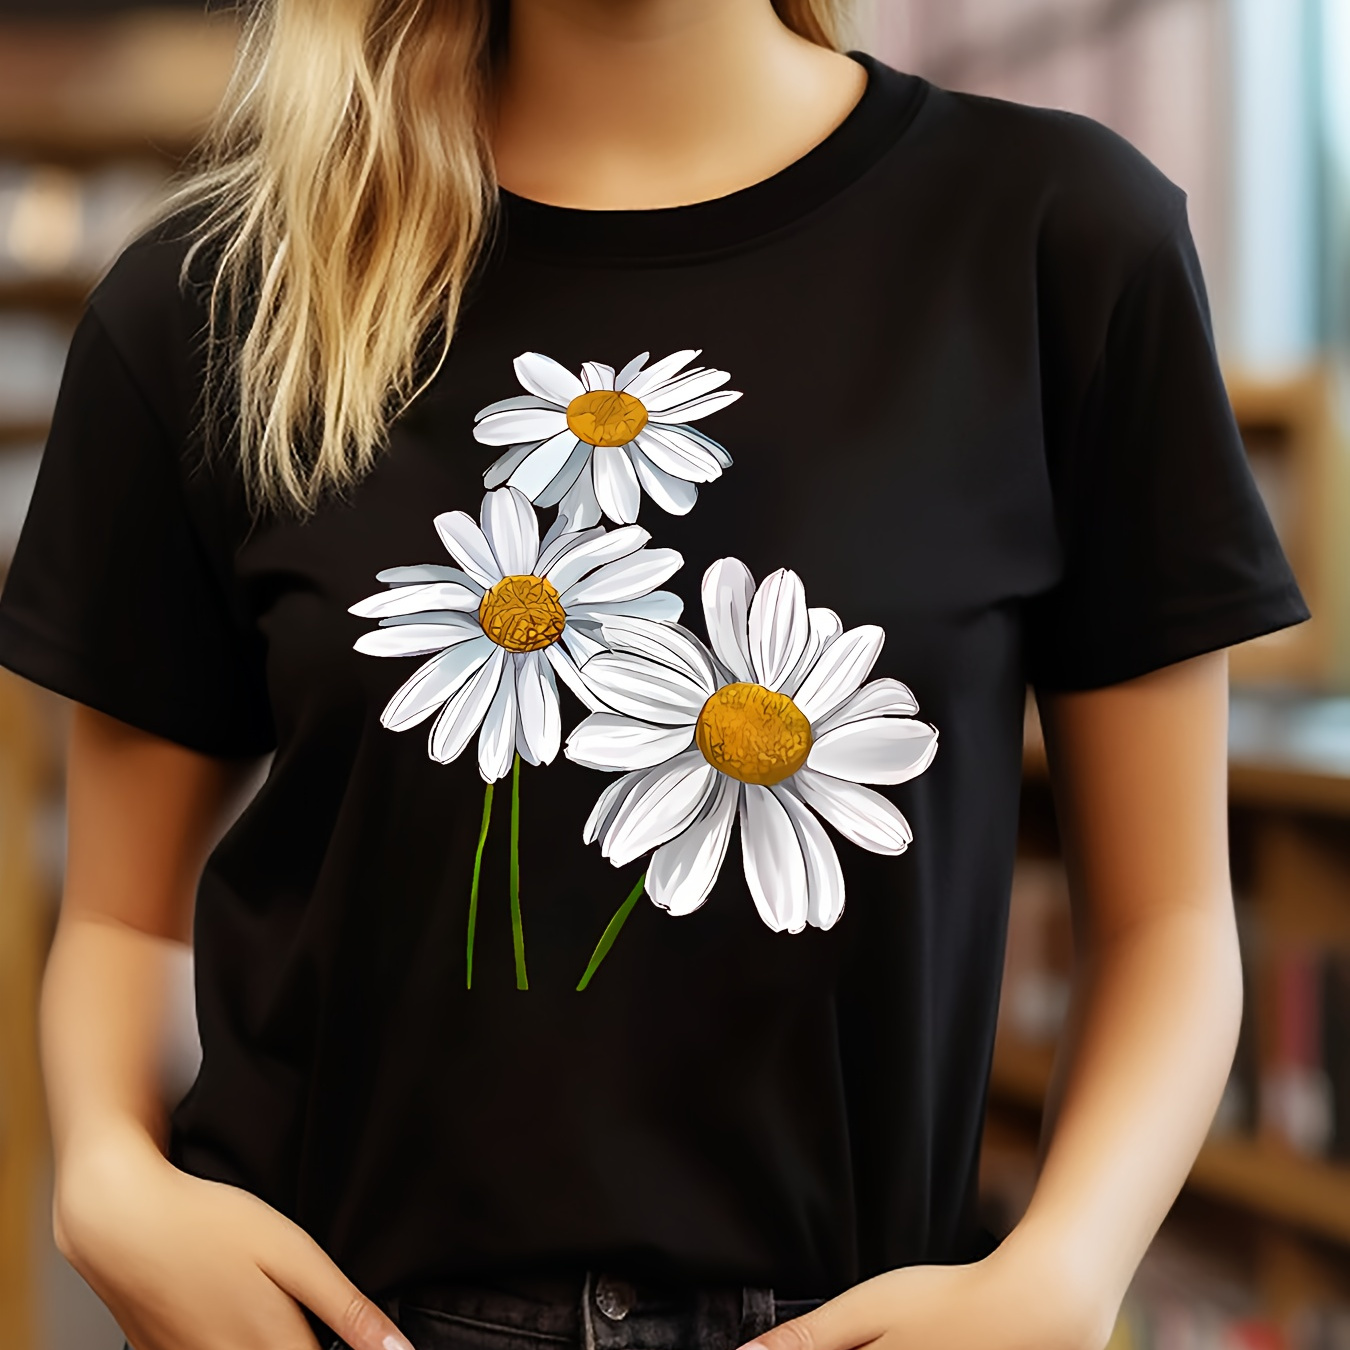 

Cute Daisy Floral Graphic Print T-shirt, Short Sleeve Crew Neck Casual Top For Summer & Spring, Women's Clothing